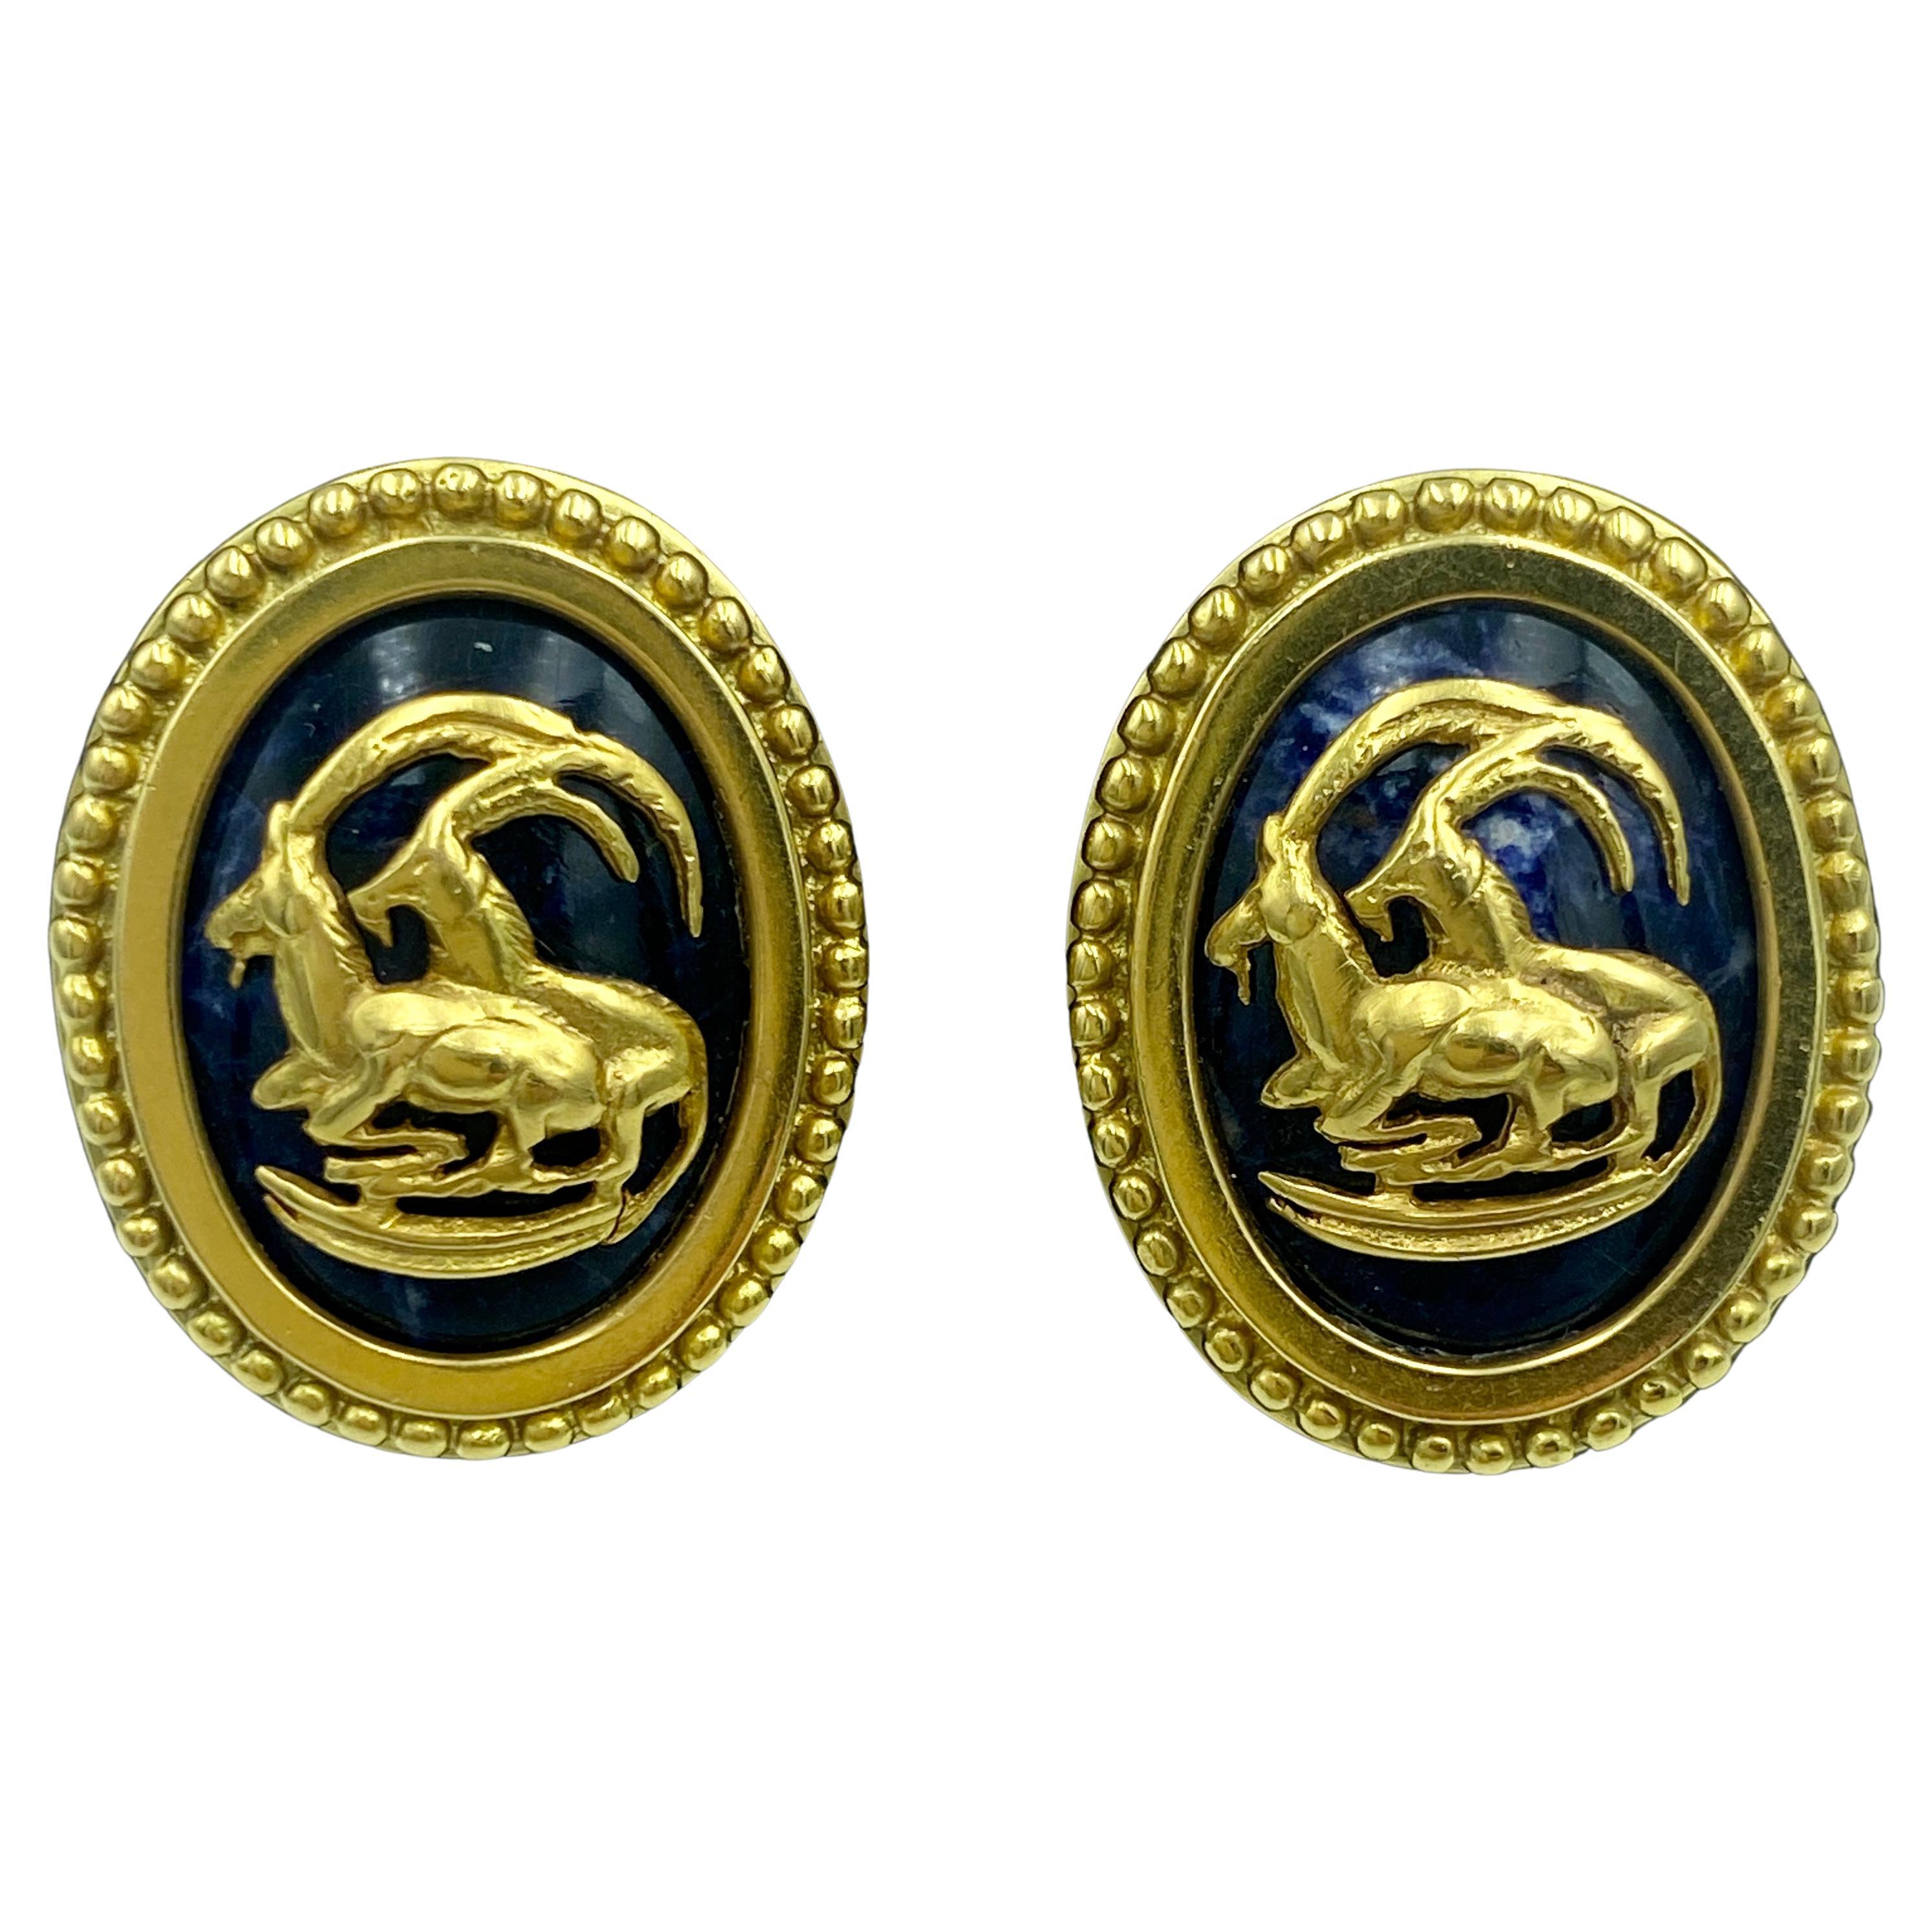 Ilias Lalaounis 18k gold and lapis lazuli earrings with mountain goat design For Sale